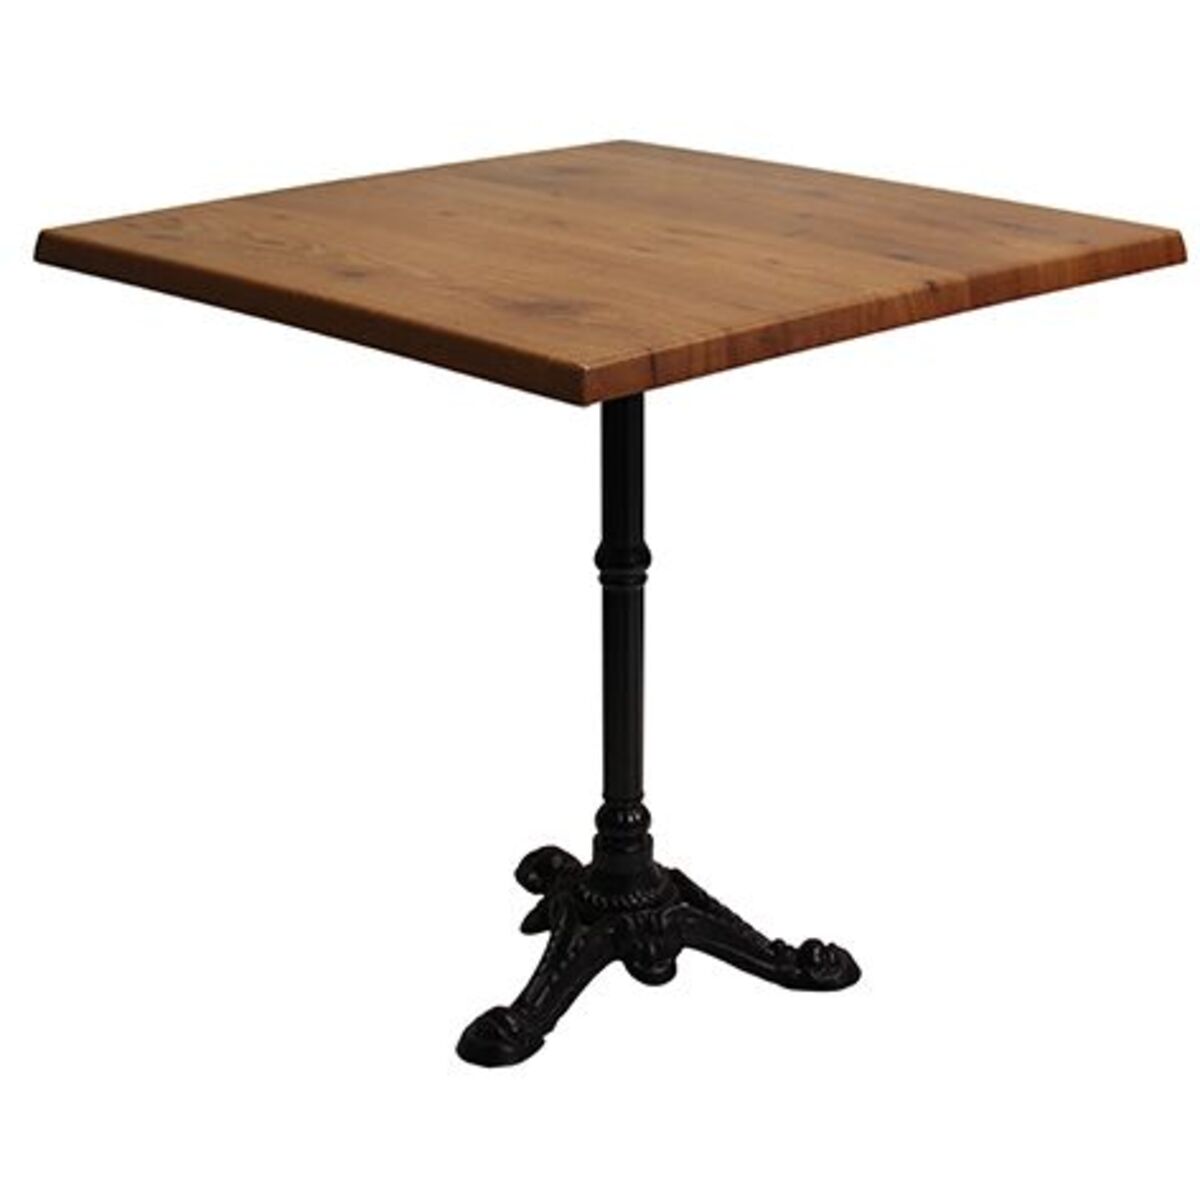 Table int. Pied fonte 3 branches bistrot & plateau werzalit pin 60x60 cm